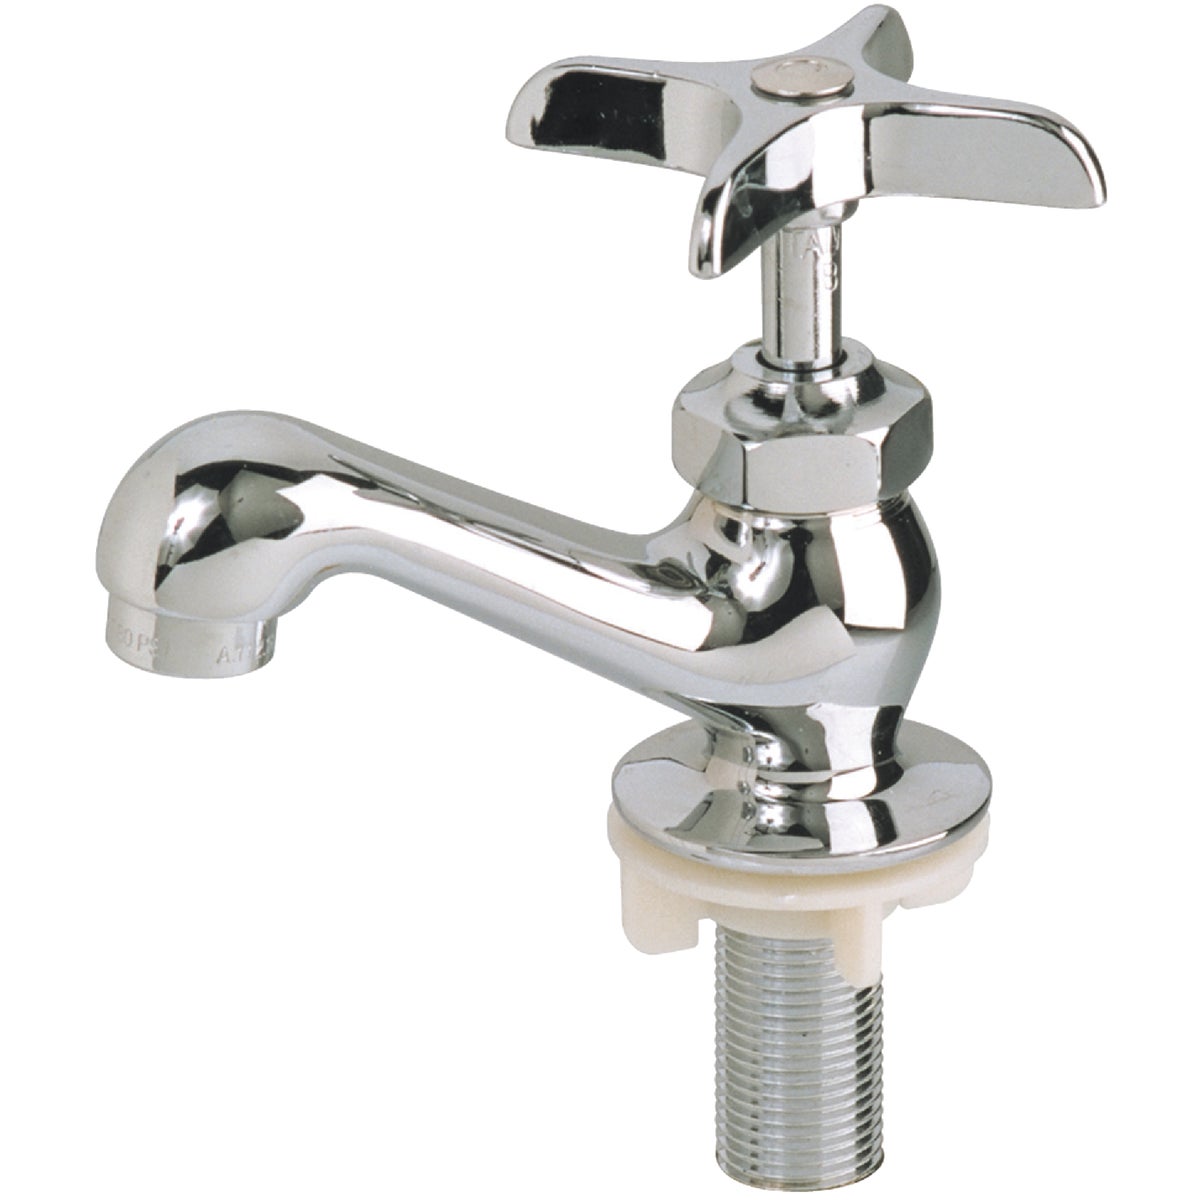 Item 459667, Heavy-duty chrome-plated brass construction, replaceable seat and stem.